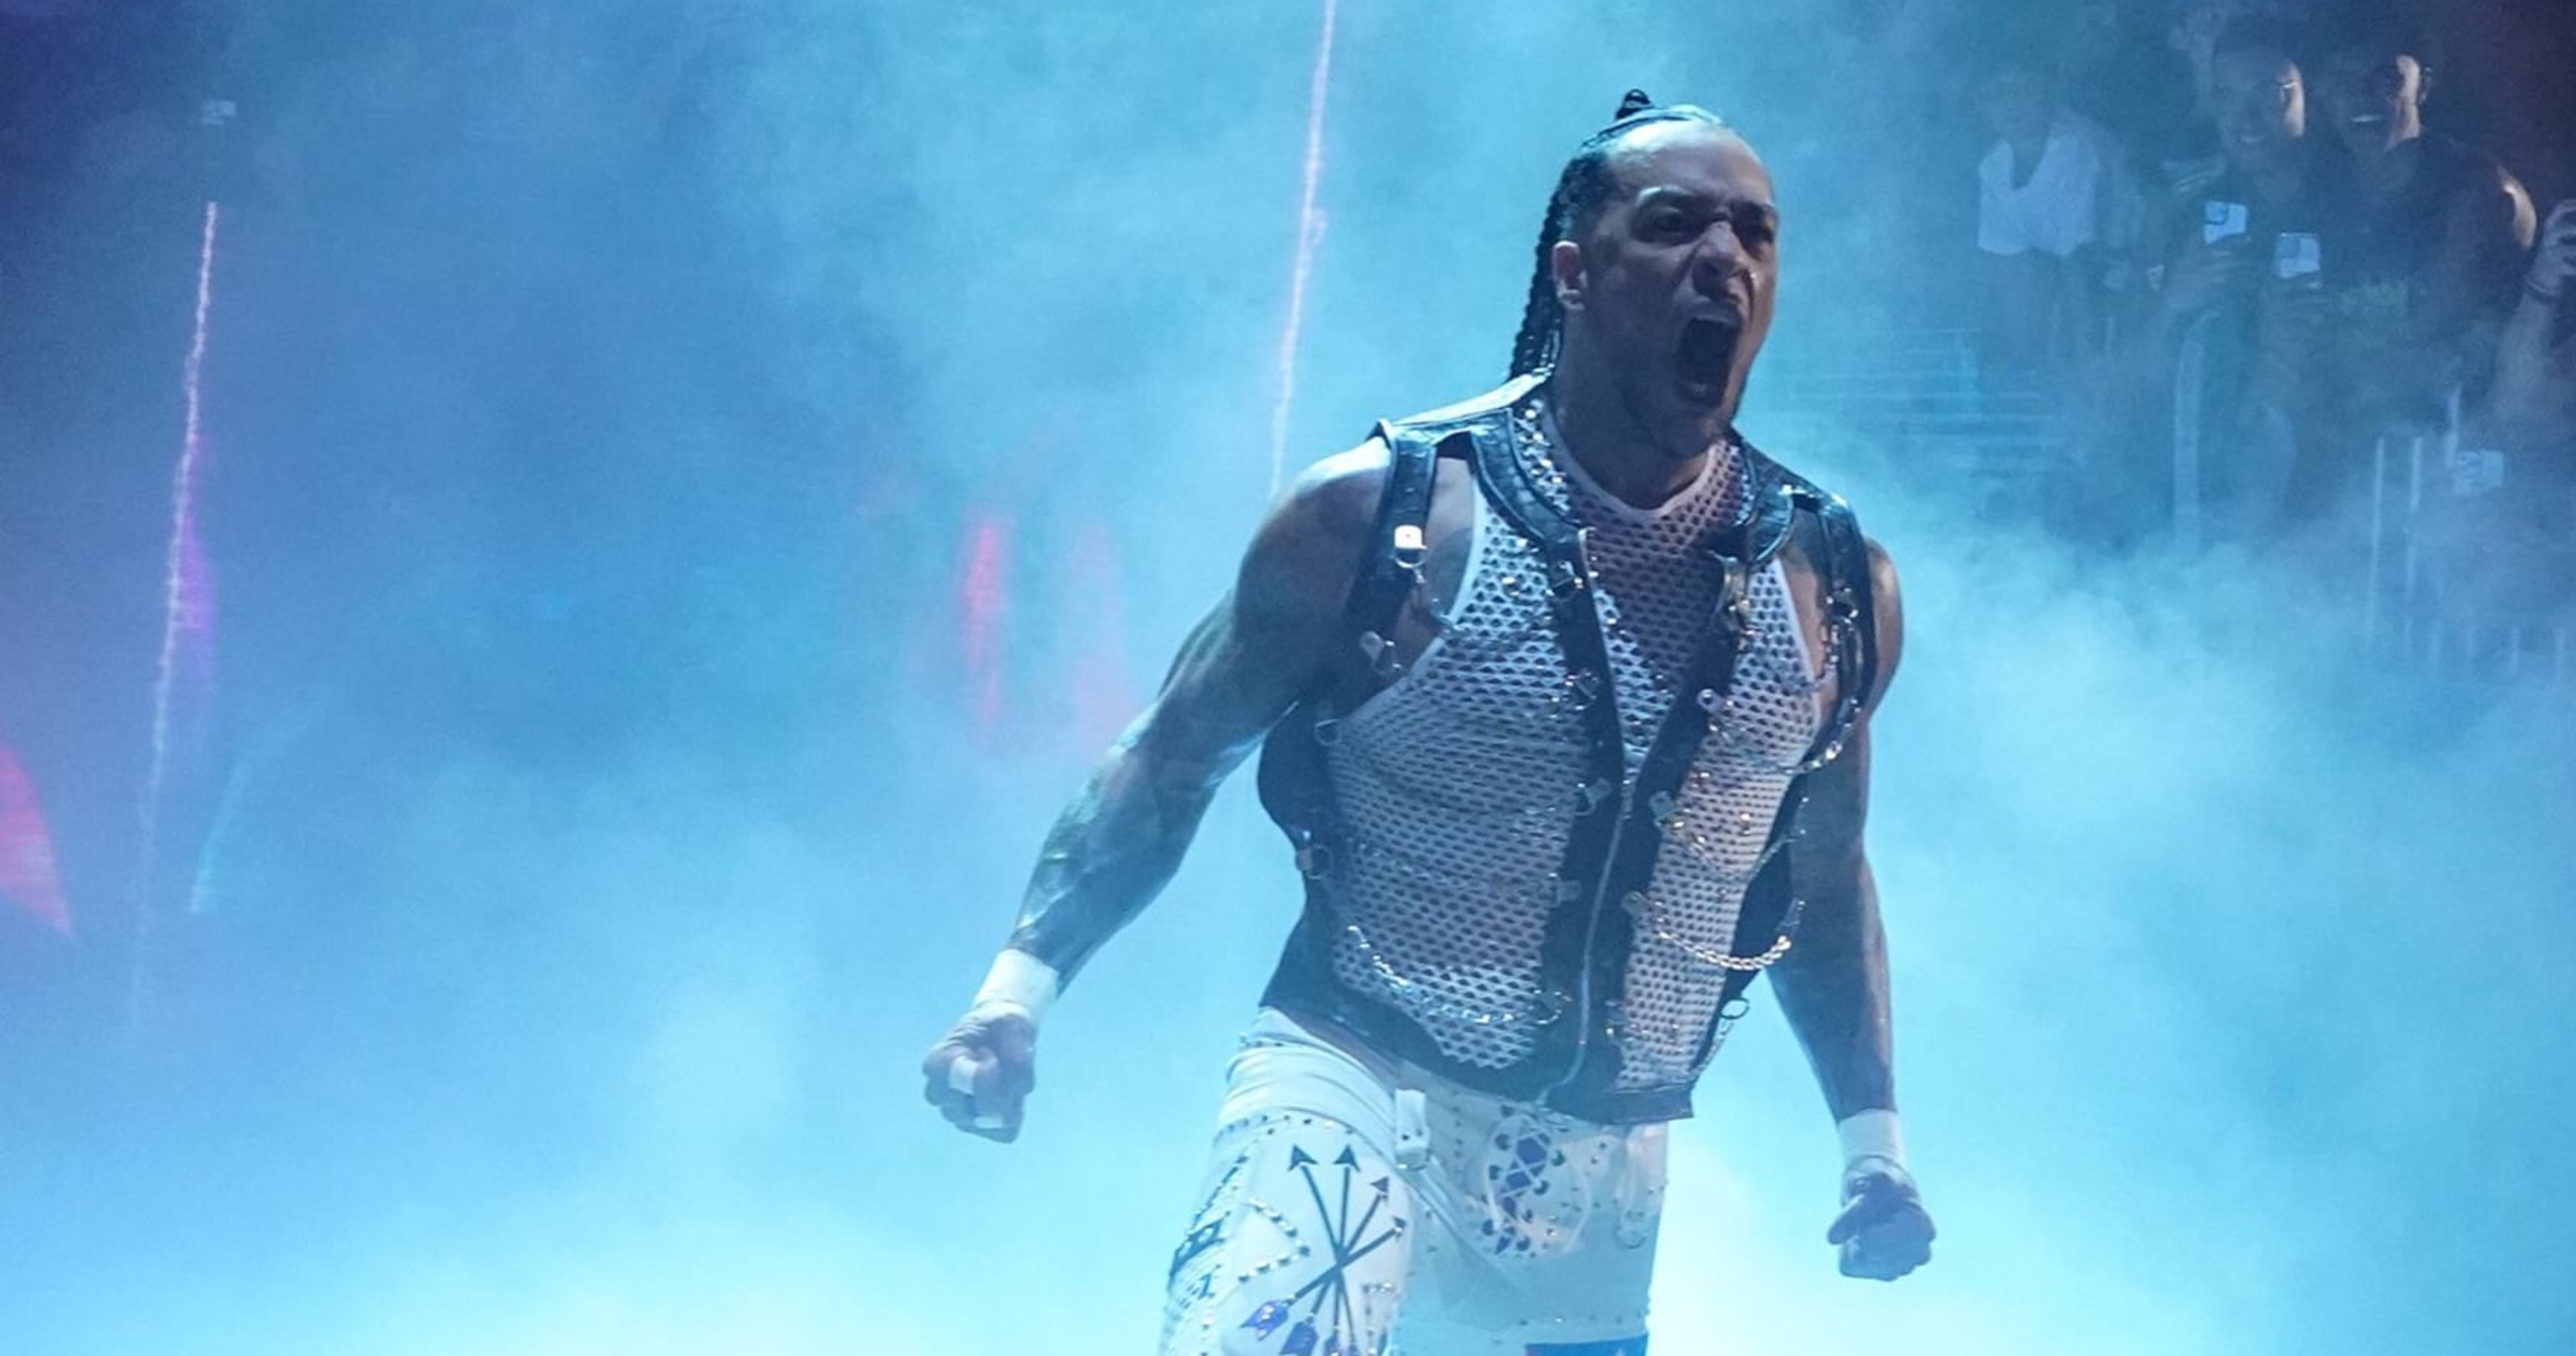 Backstage Wwe And Aew Rumors Latest On Damian Priest Double Or Nothing And More News Scores 